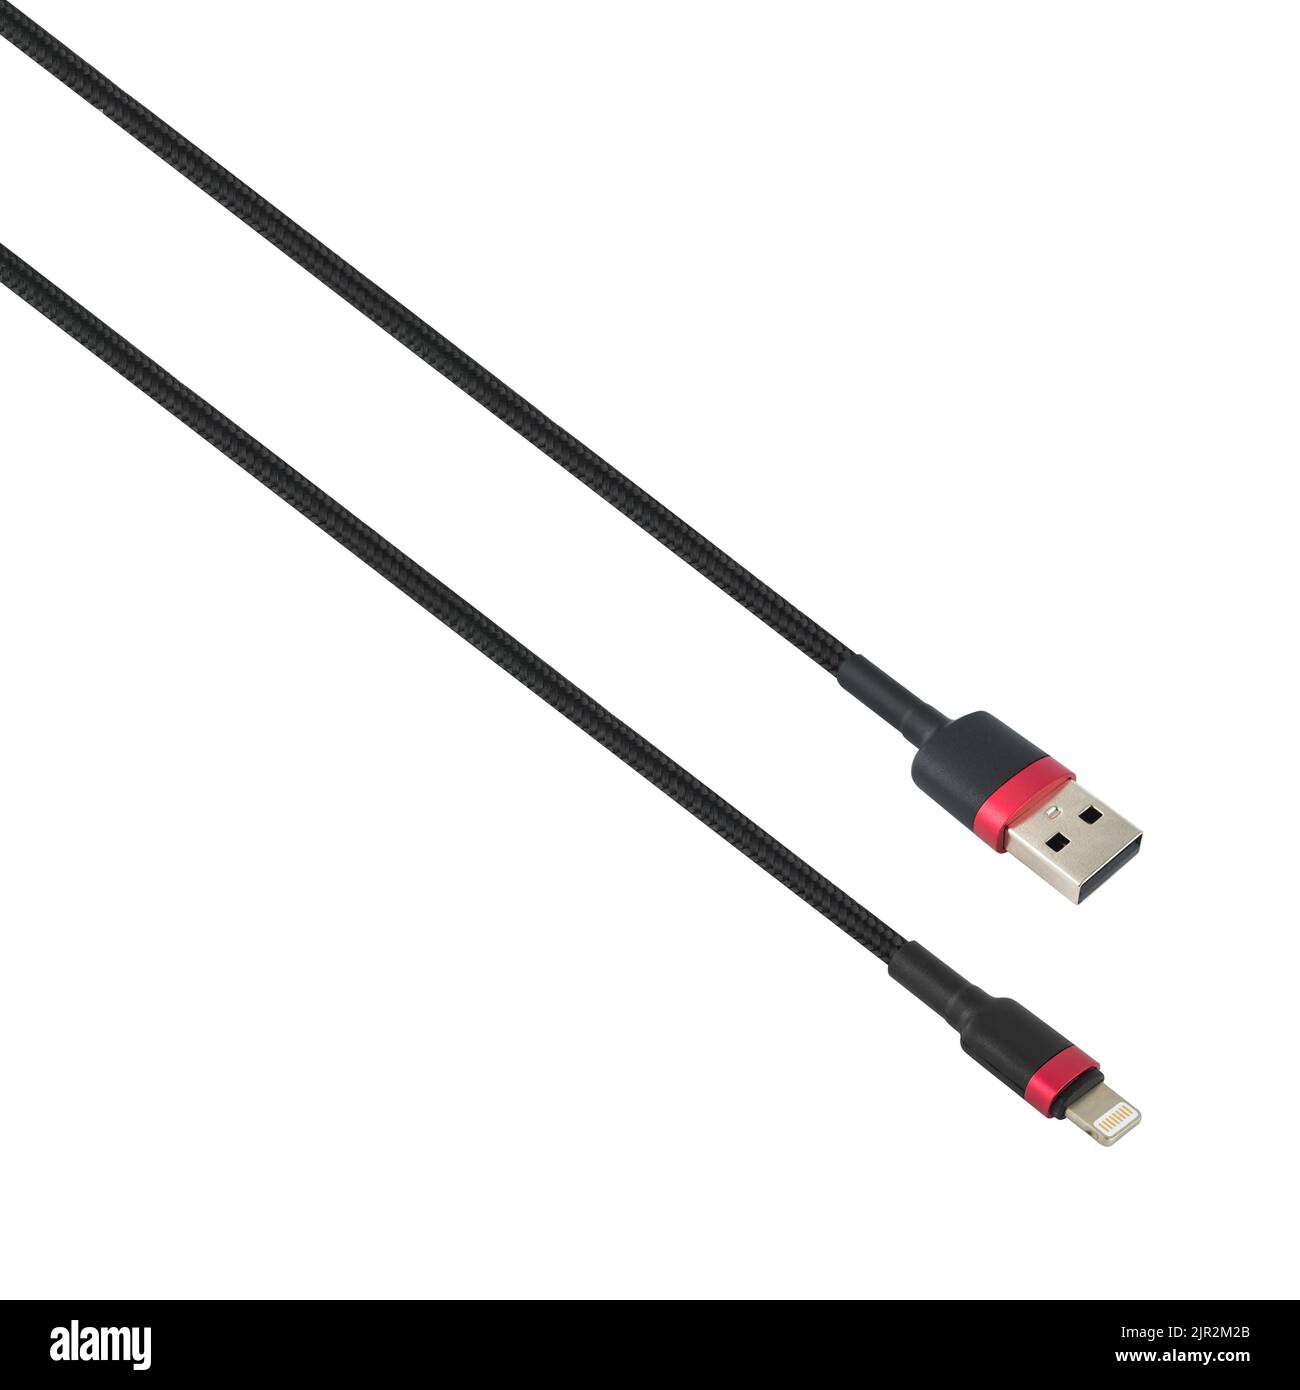 Cable with USB and Lightning connector, on white background Stock Photo